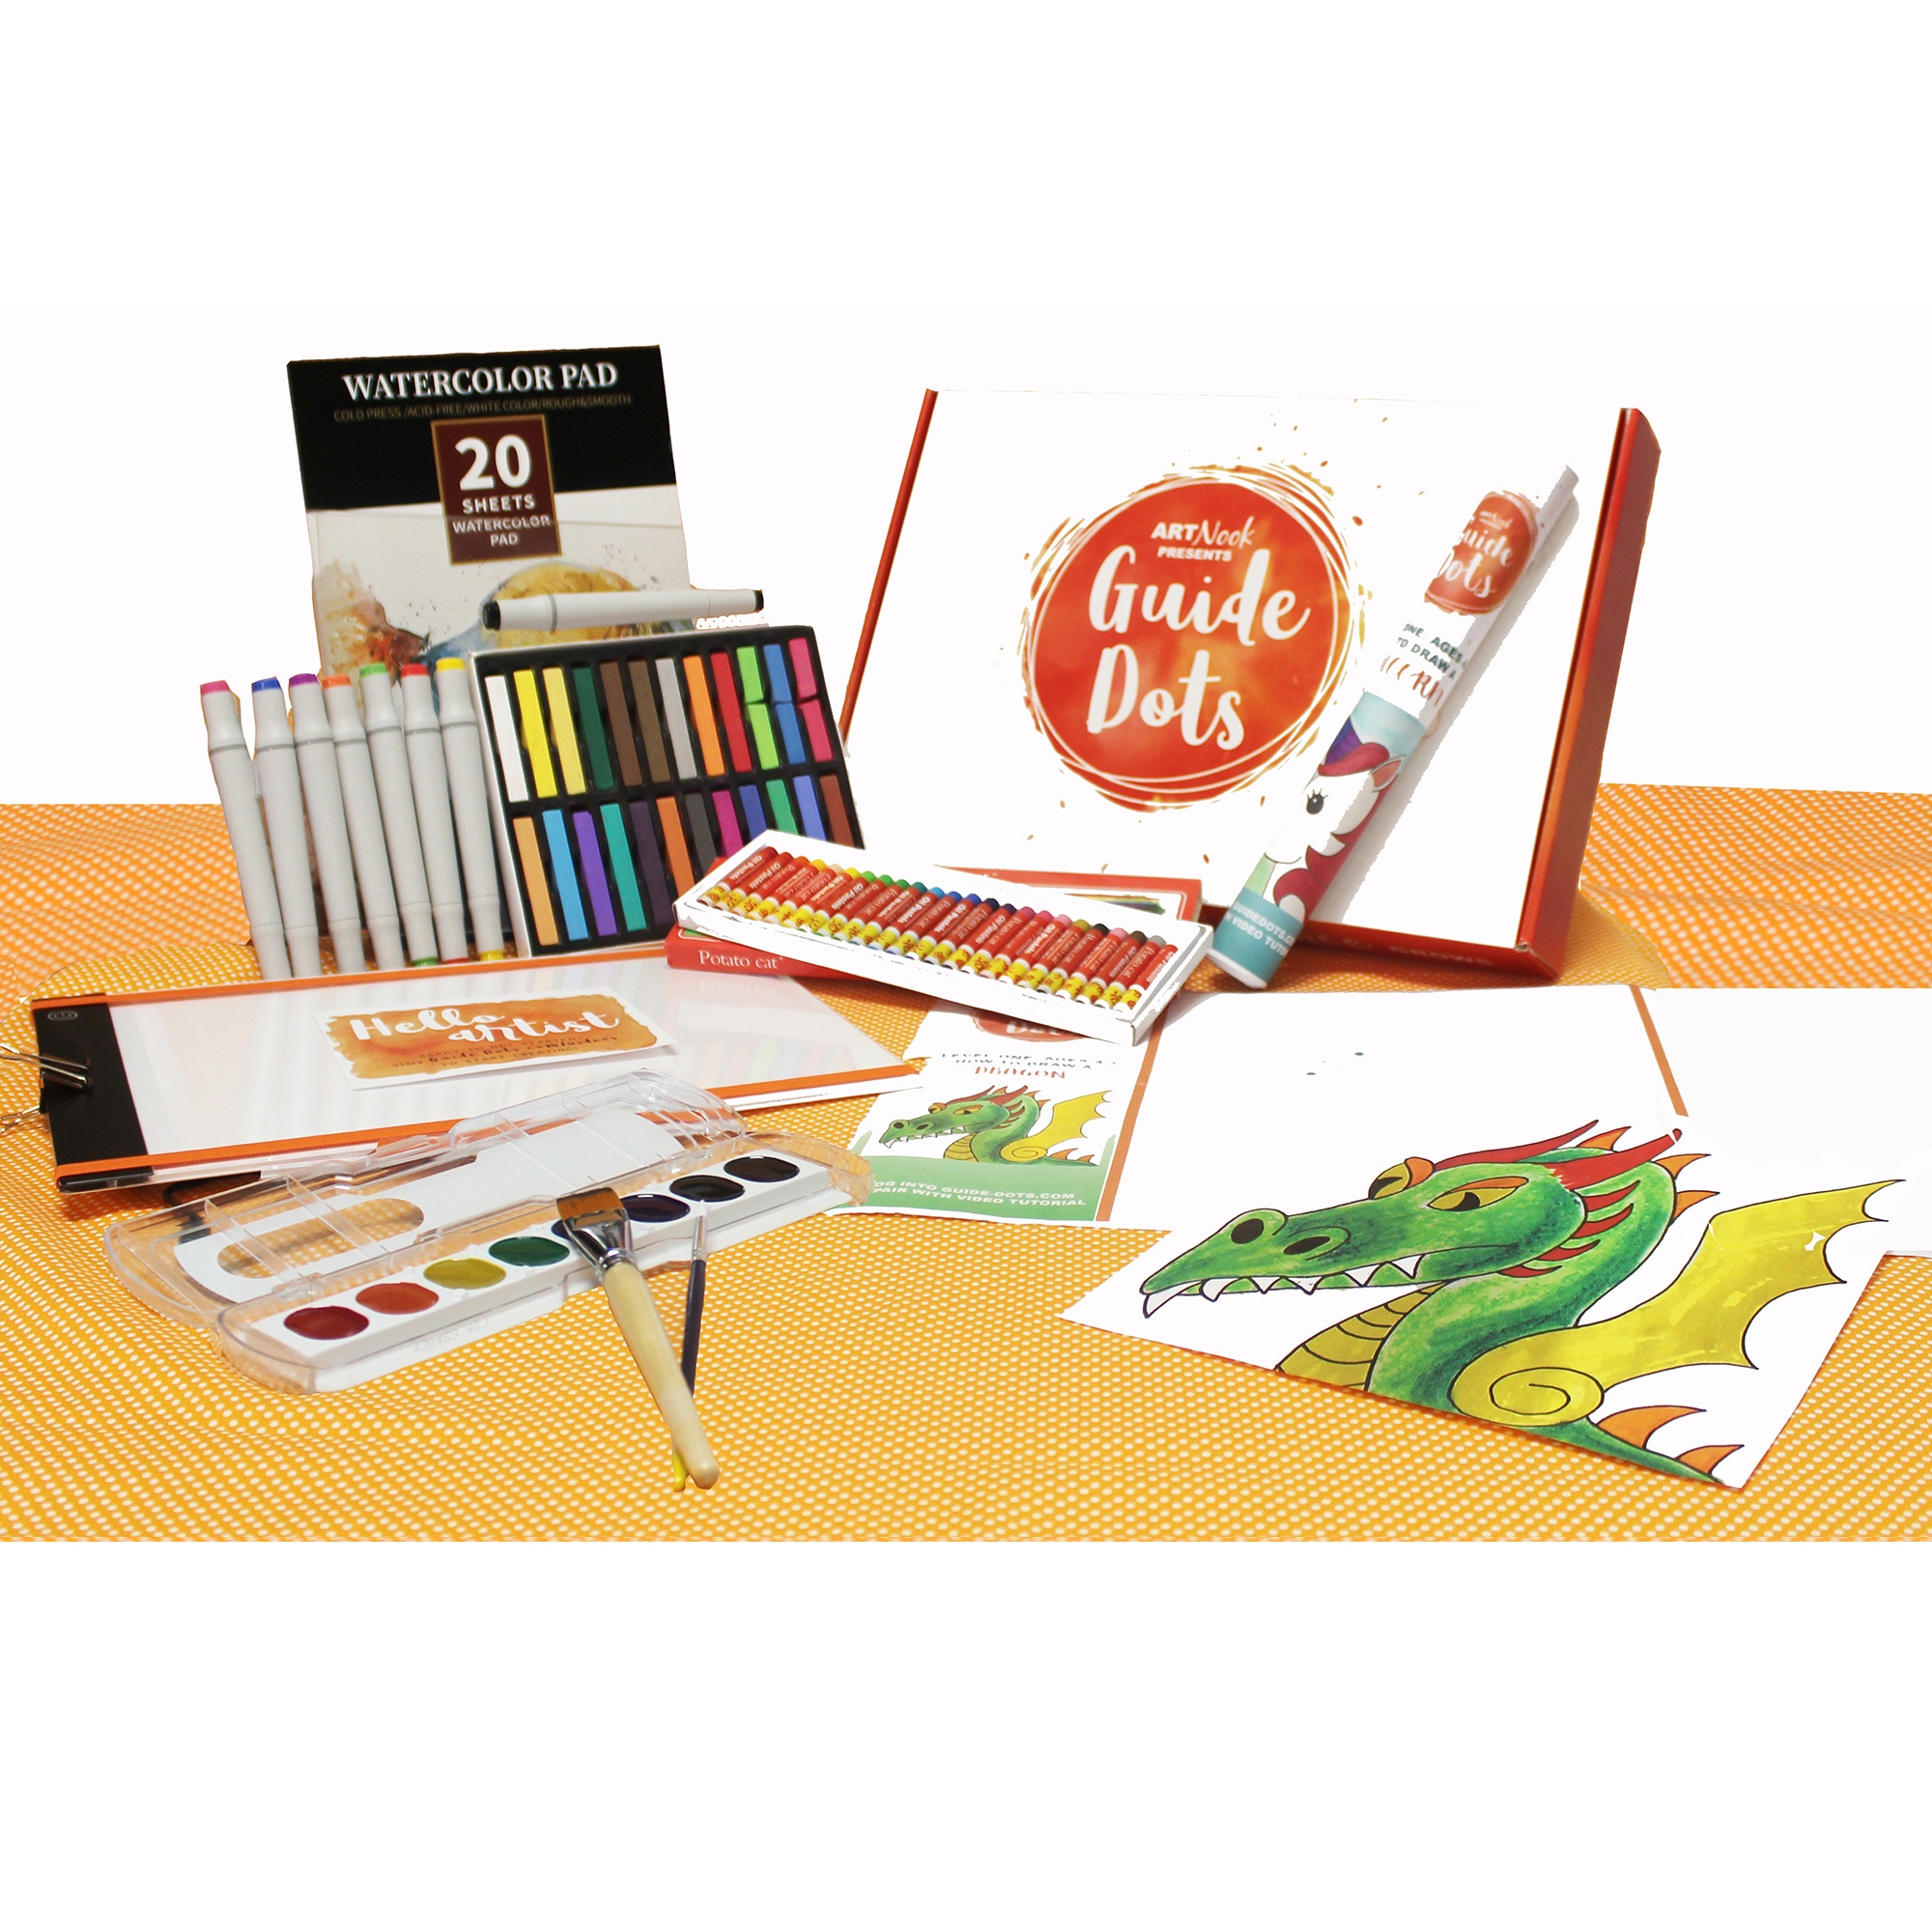 Fun Products To Keep Your Kids Learning